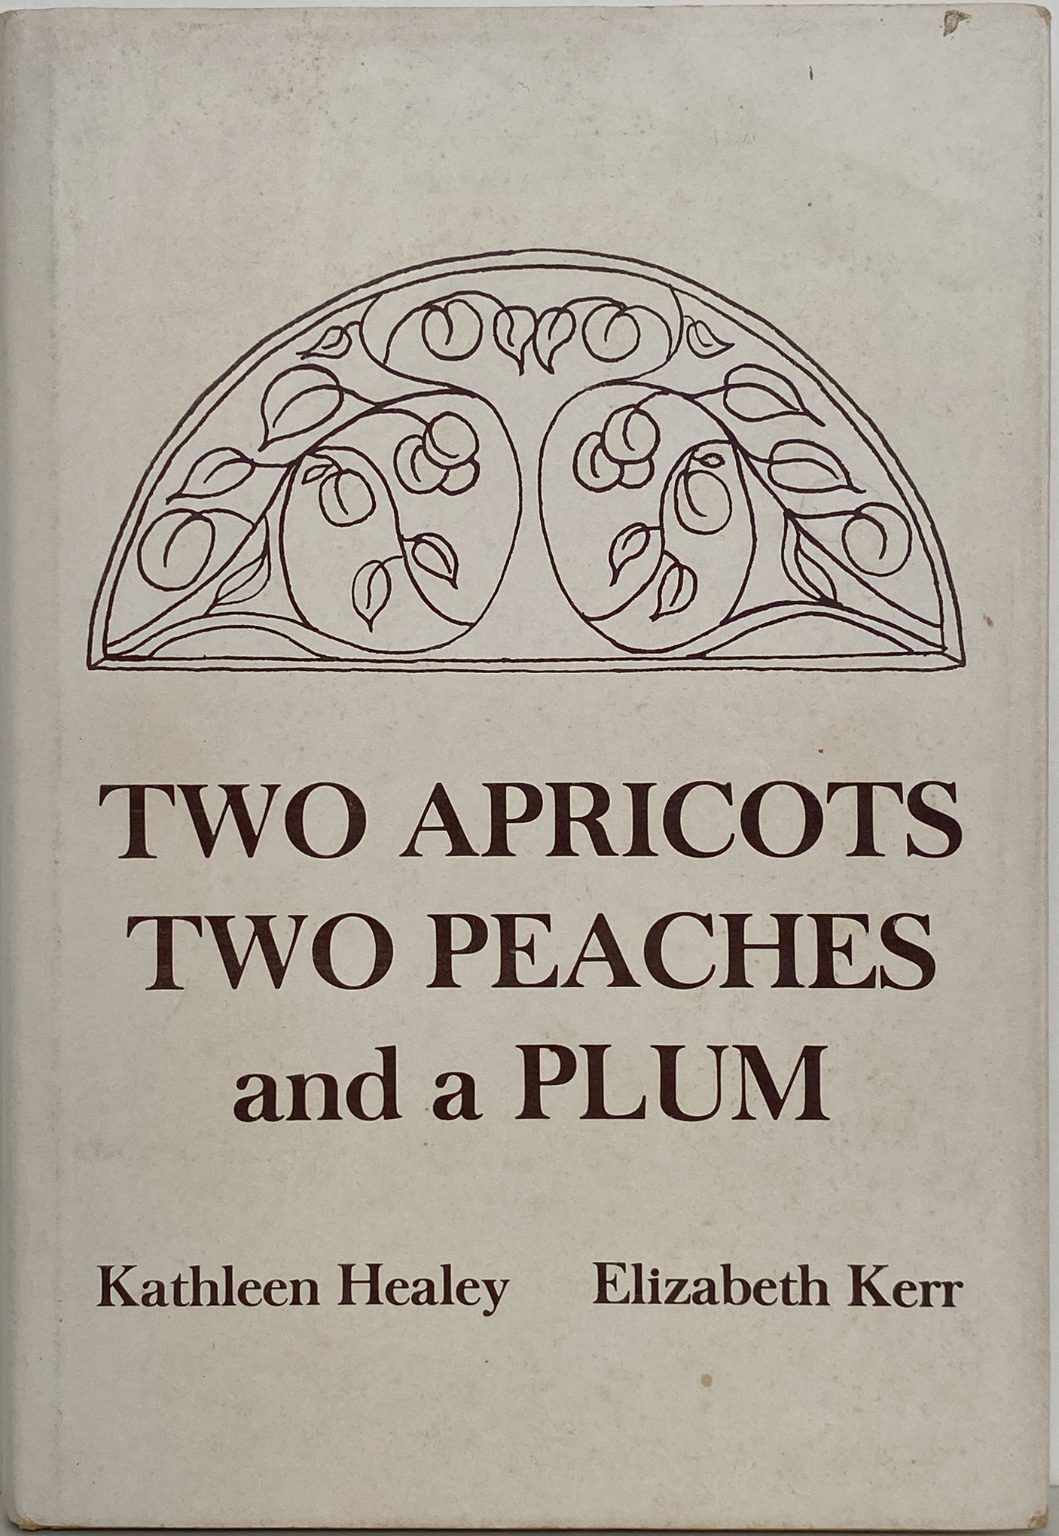 TWO APRICOTS, TWO PEACHES, and a PLUM